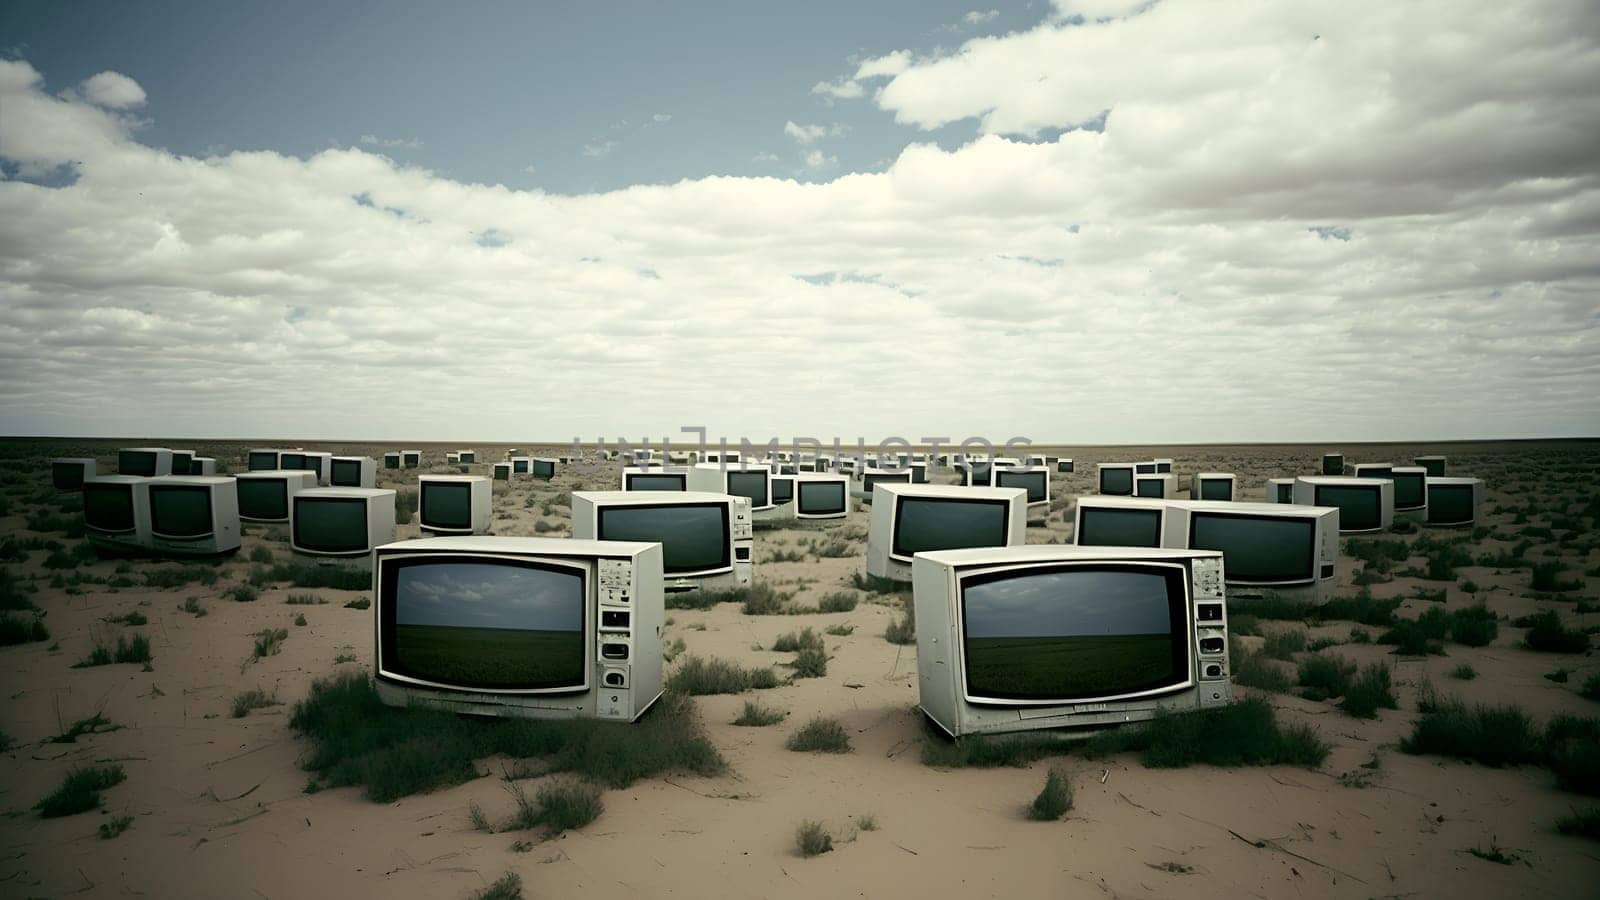 desert covered with old analog tv sets at summer daylight, neural network generated art. Digitally generated image. Not based on any actual person, scene or pattern.